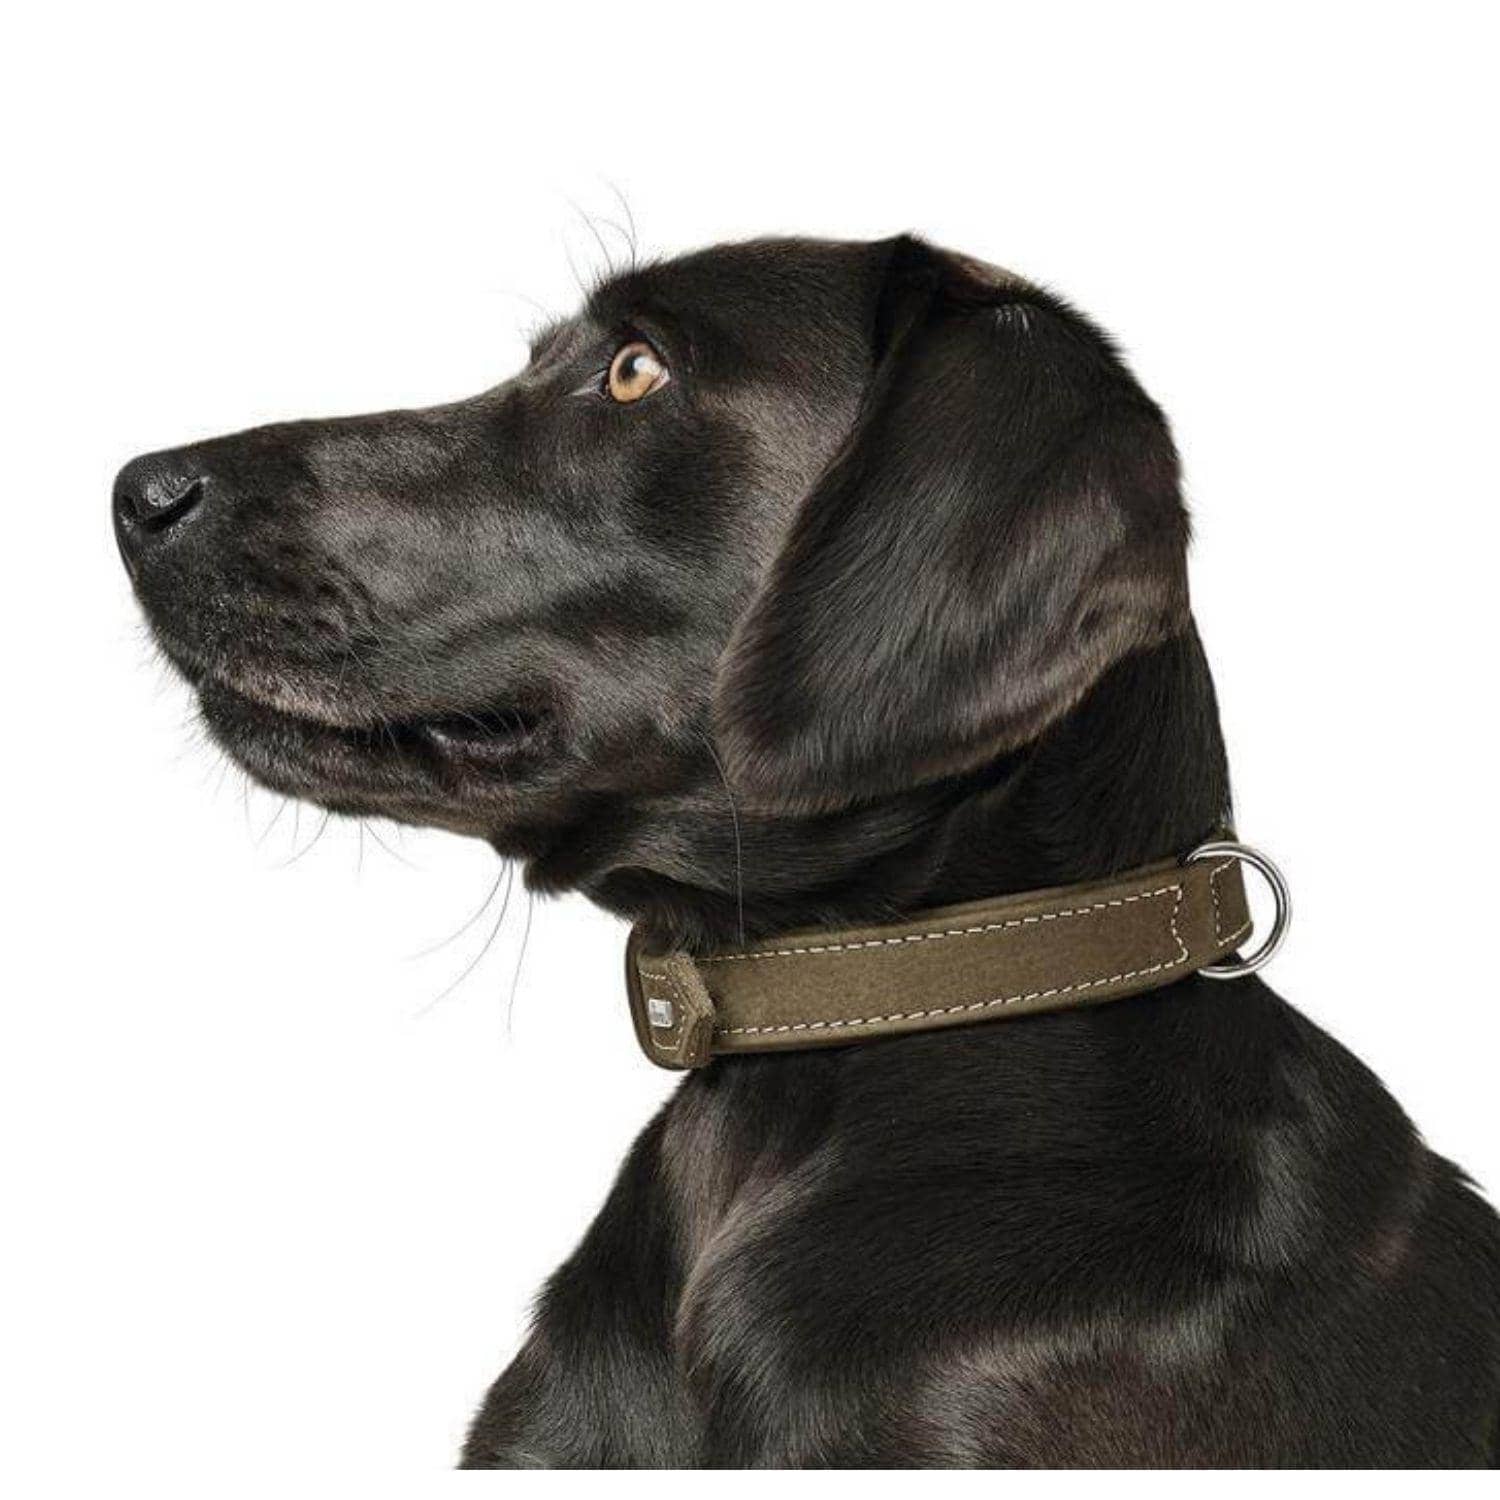 Nubuk Olive Leather Dog Collar - Animal Outfitters Cat & Dog Accessories